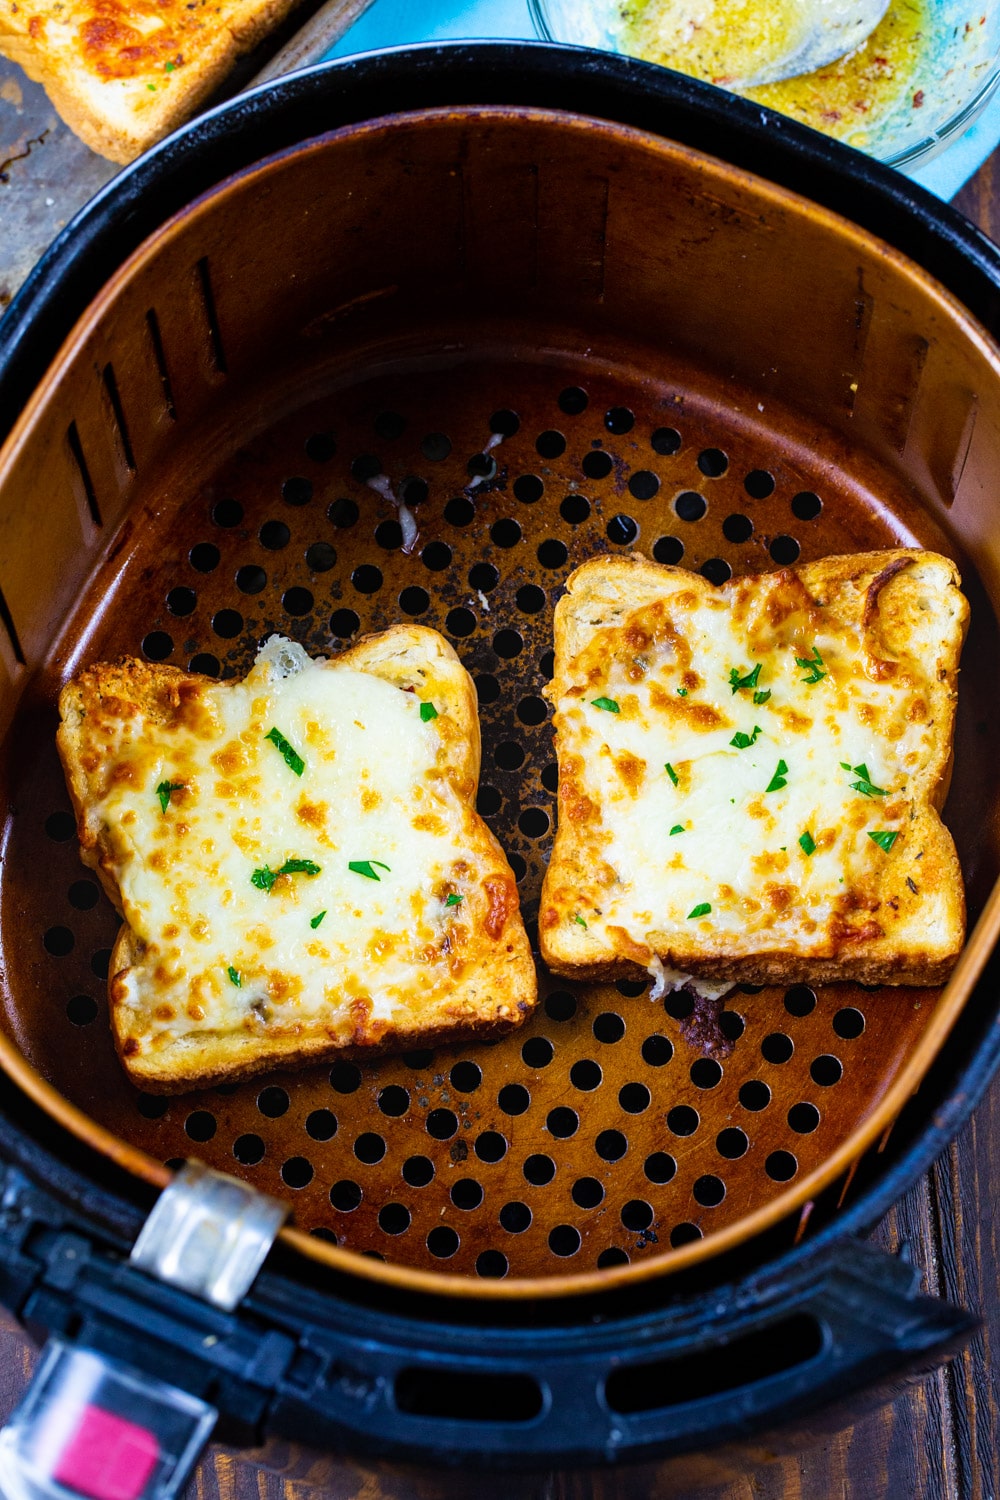 Two slices of Texas Toast in air fryer basket.